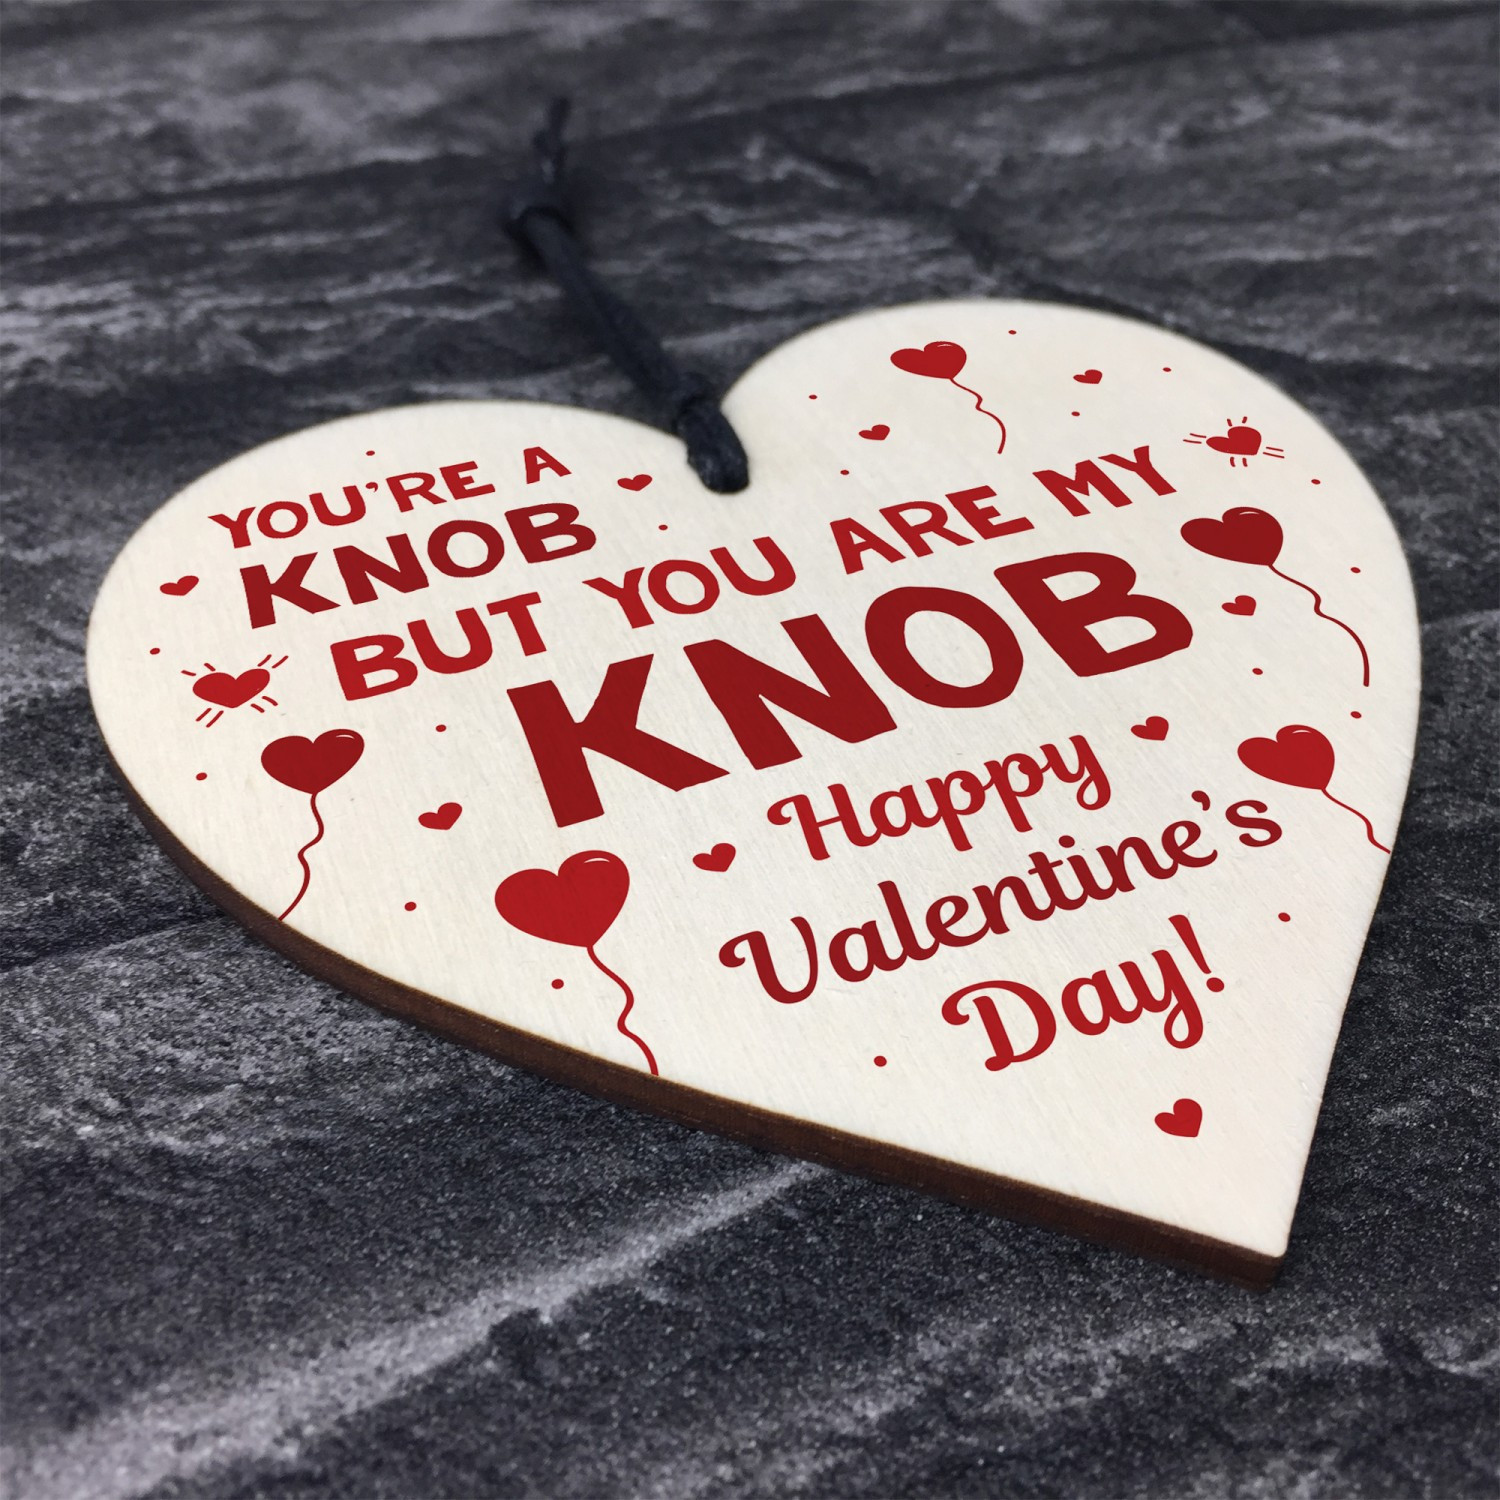 Funny Valentines Day Gifts For Boyfriend
 Funny Rude Valentines Day Gift For Your Boyfriend Husband